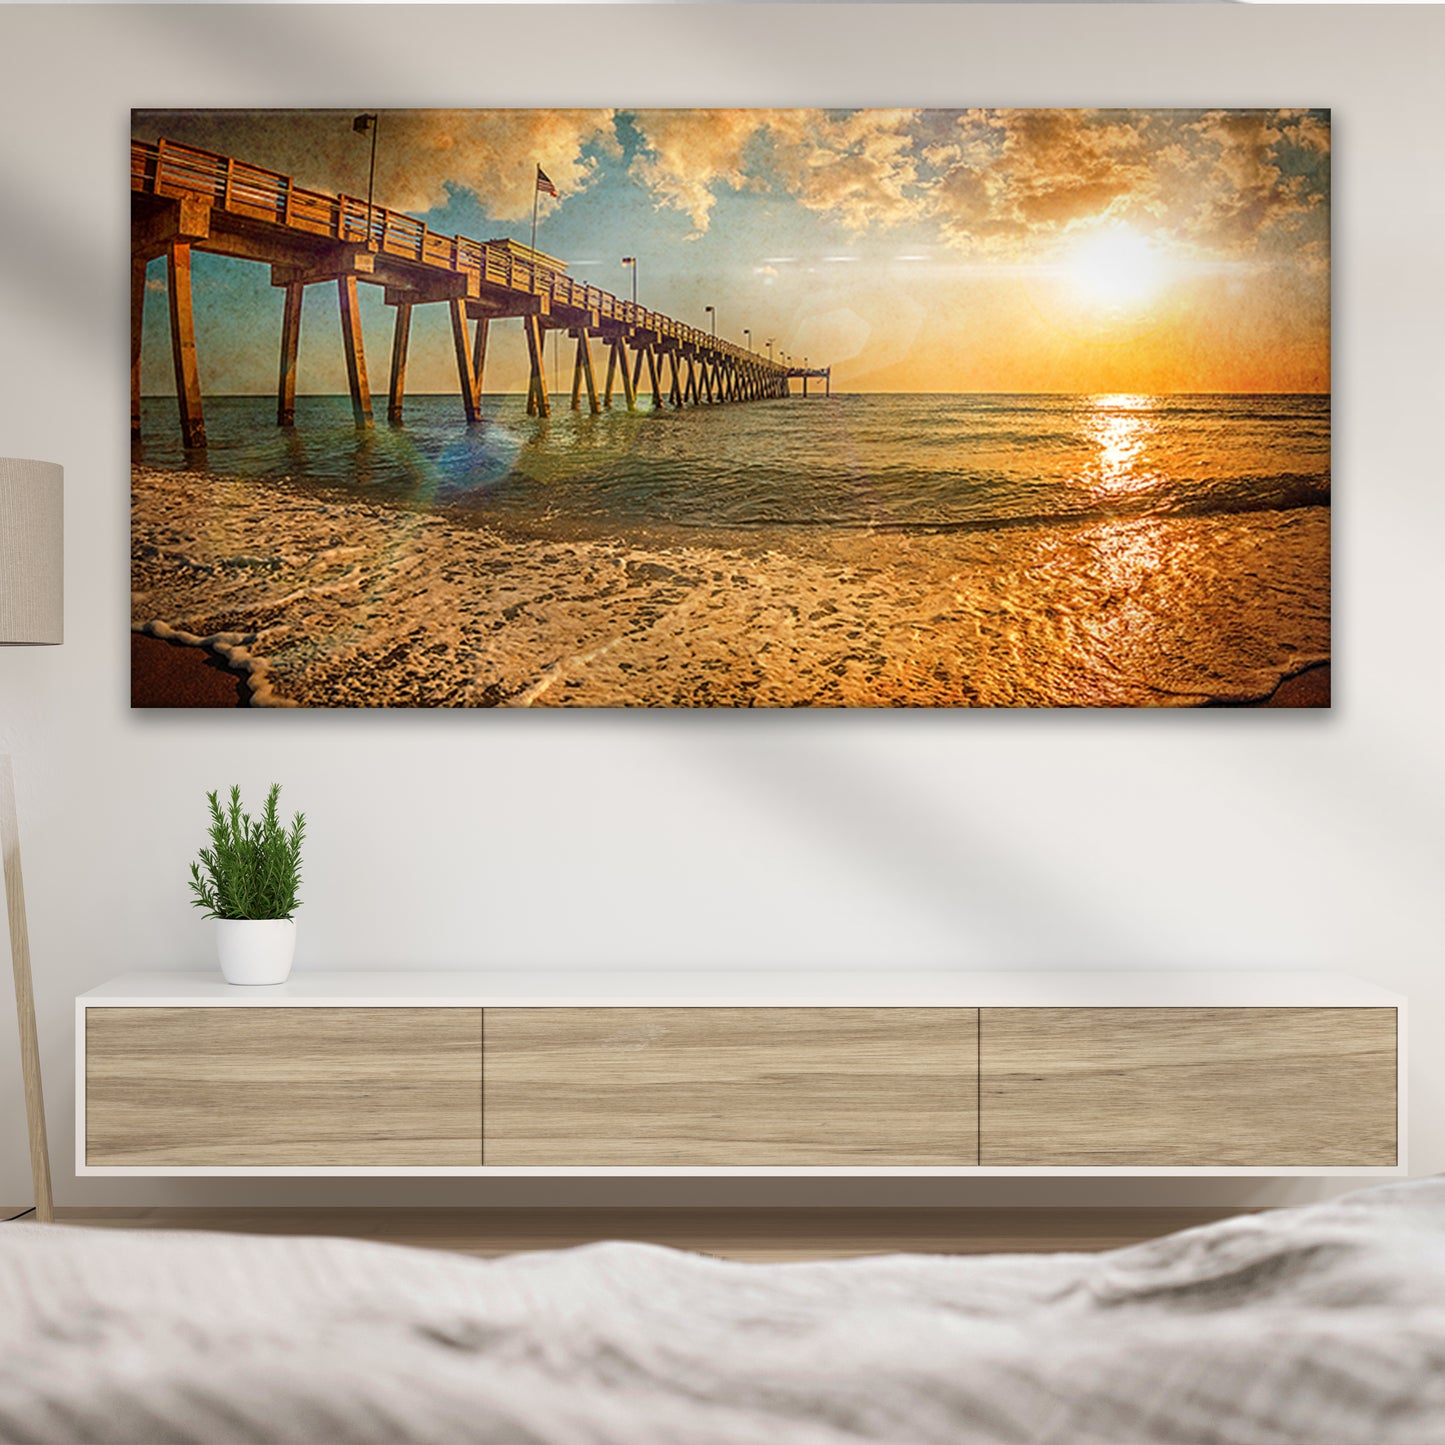 Vintage Sunset Beach Pier Canvas Wall Art - Image by Tailored Canvases